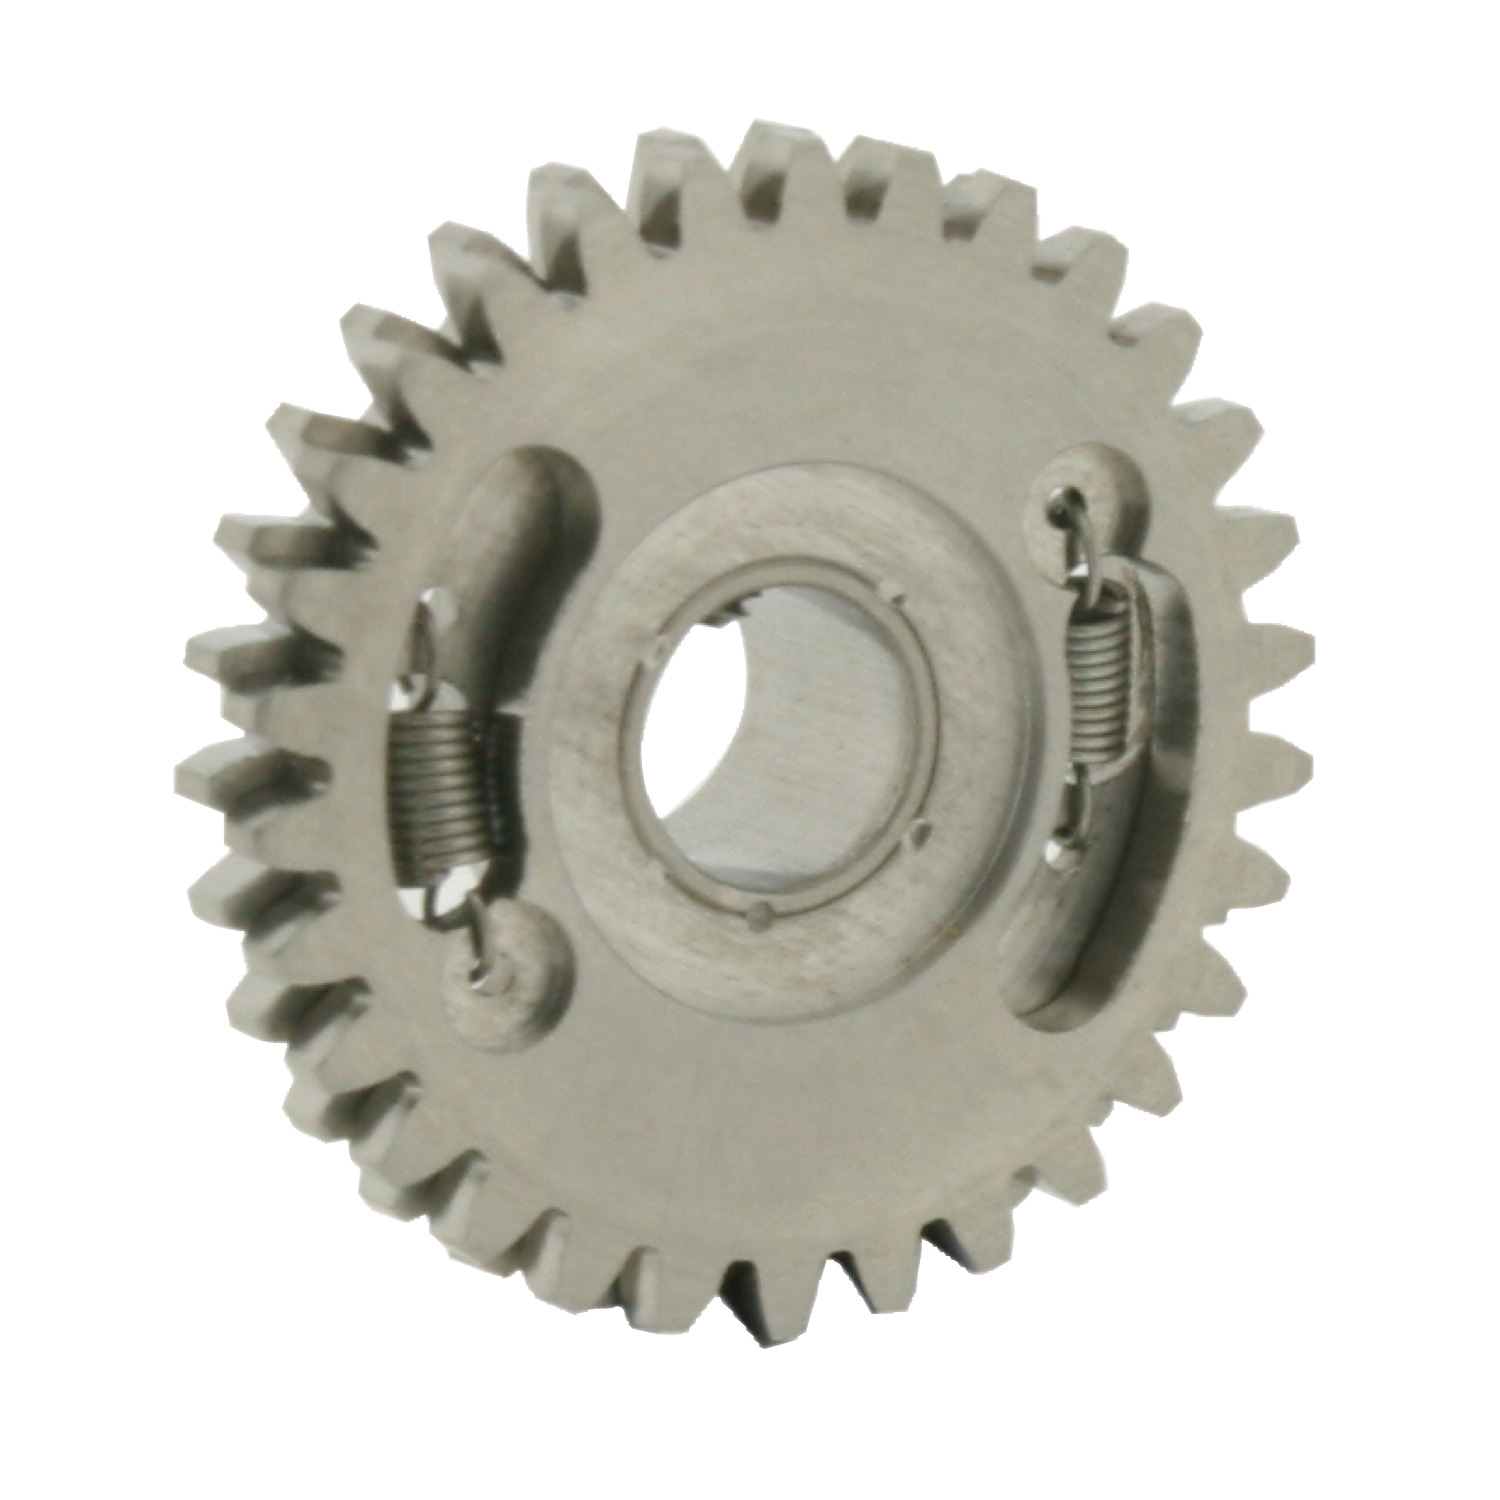 Product R2090, Nonmetallic Nylon Spur Gears Nylon Gear with a Stainless Steel Core / 